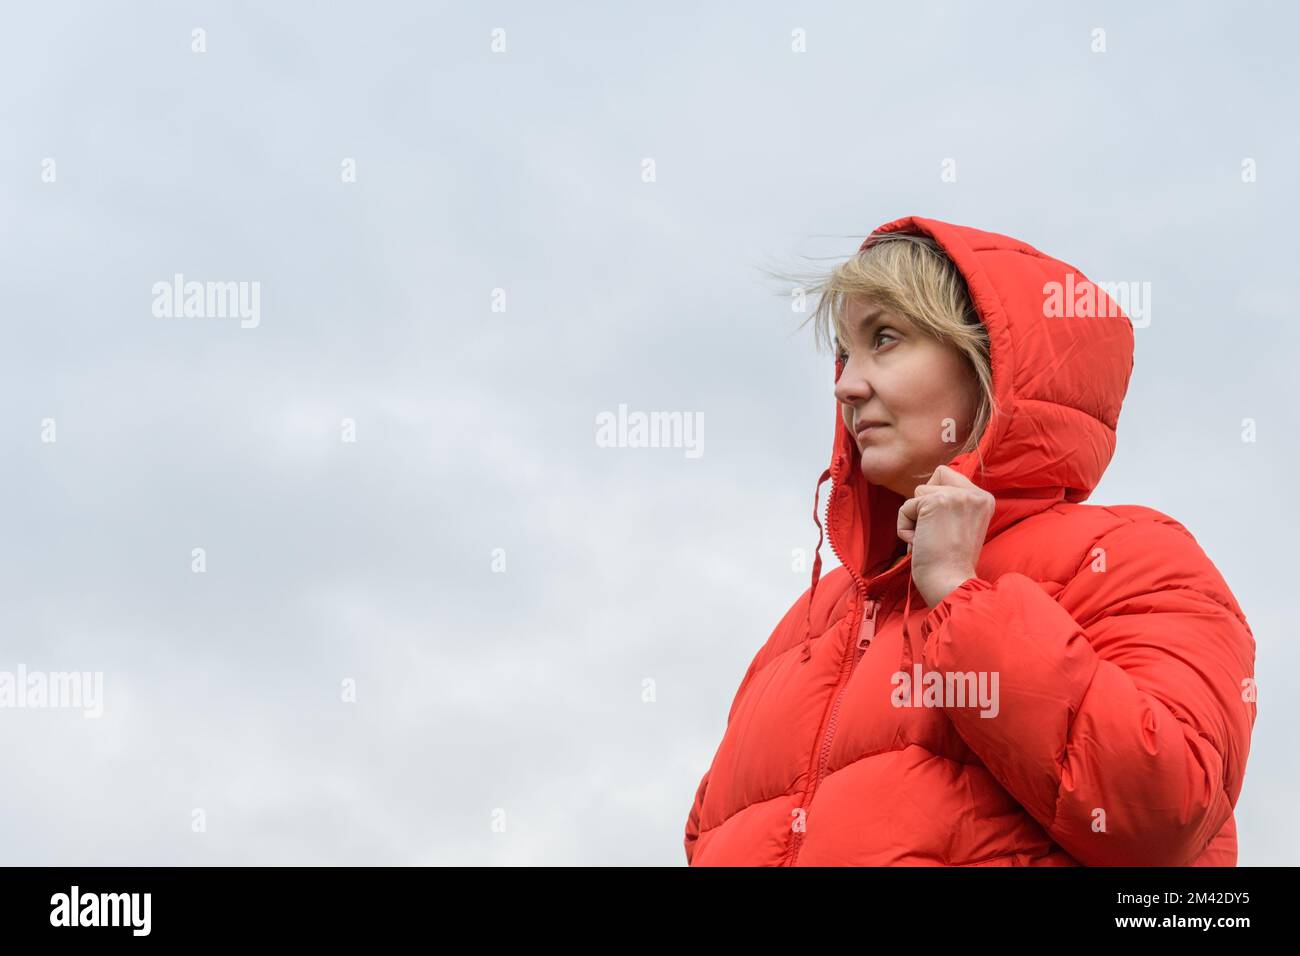 Woman in a red jacket. Portrait against a cloudy sky. copy space Stock Photo